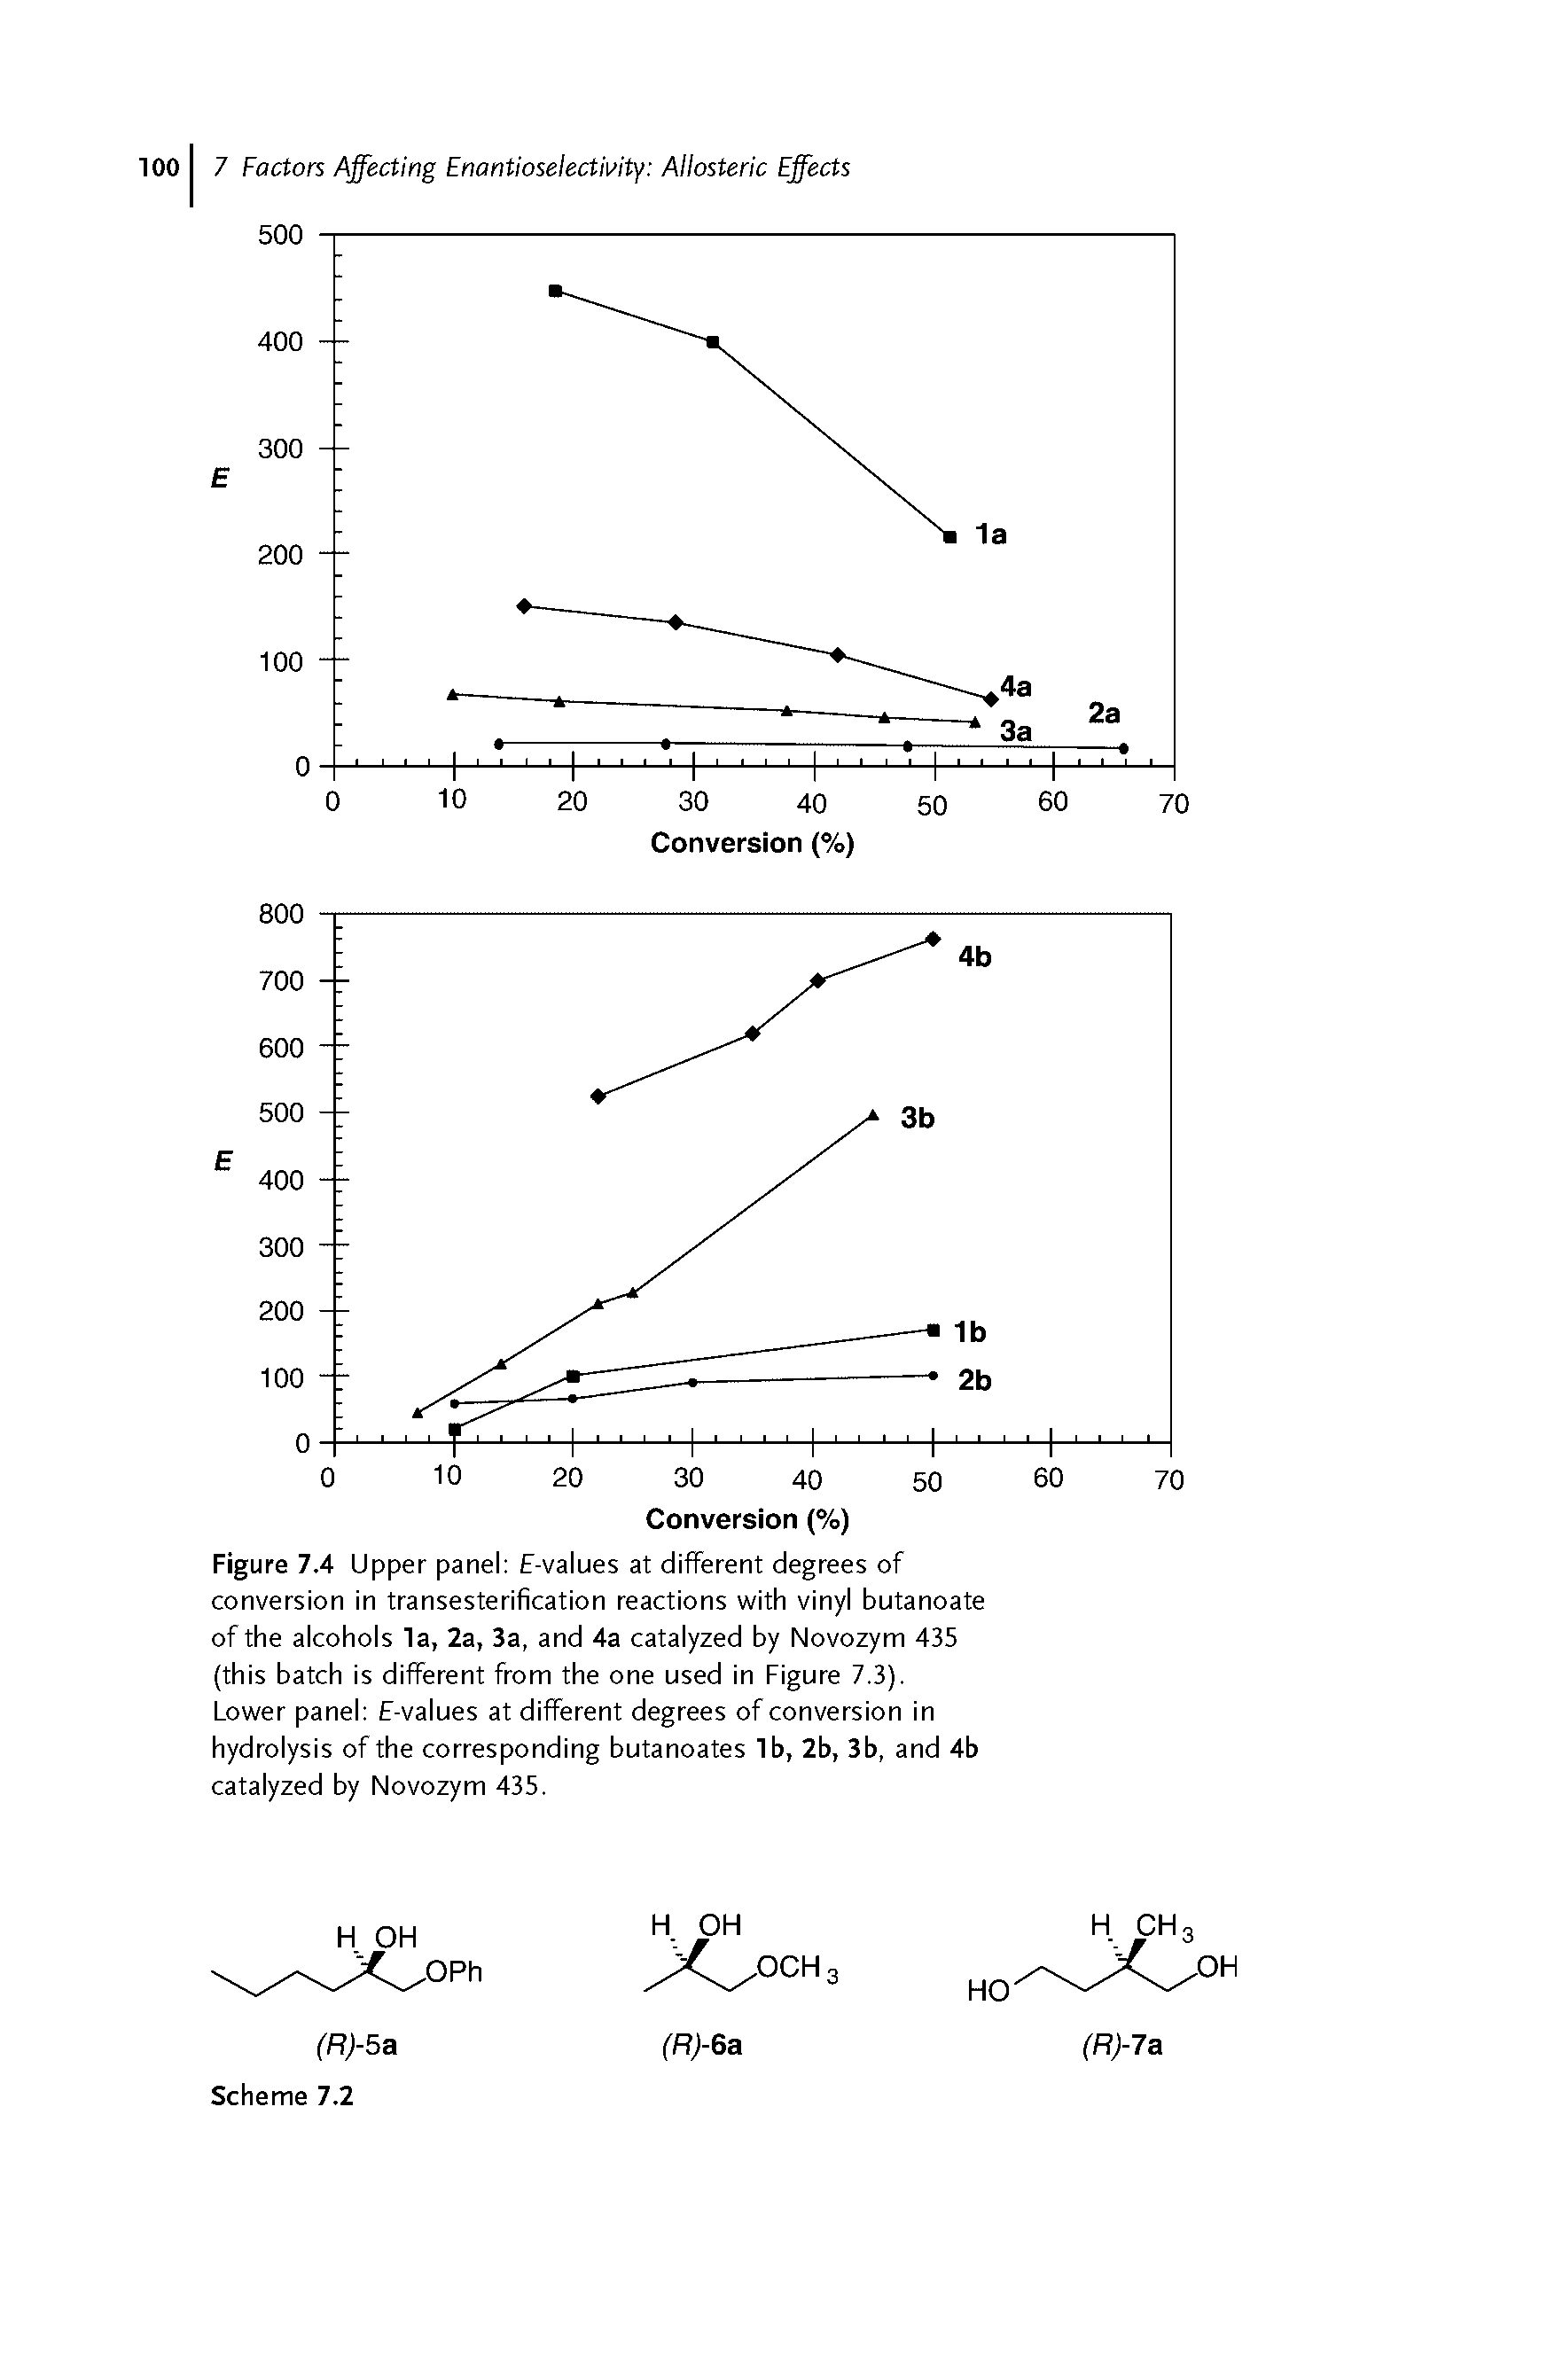 Figure 7.4 Upper panel E-values at different degrees of conversion in transesterification reactions with vinyl butanoate of the alcohols la, 2a, 3a, and 4a catalyzed by Novozym 435 (this batch is different from the one used in Figure 7.3).